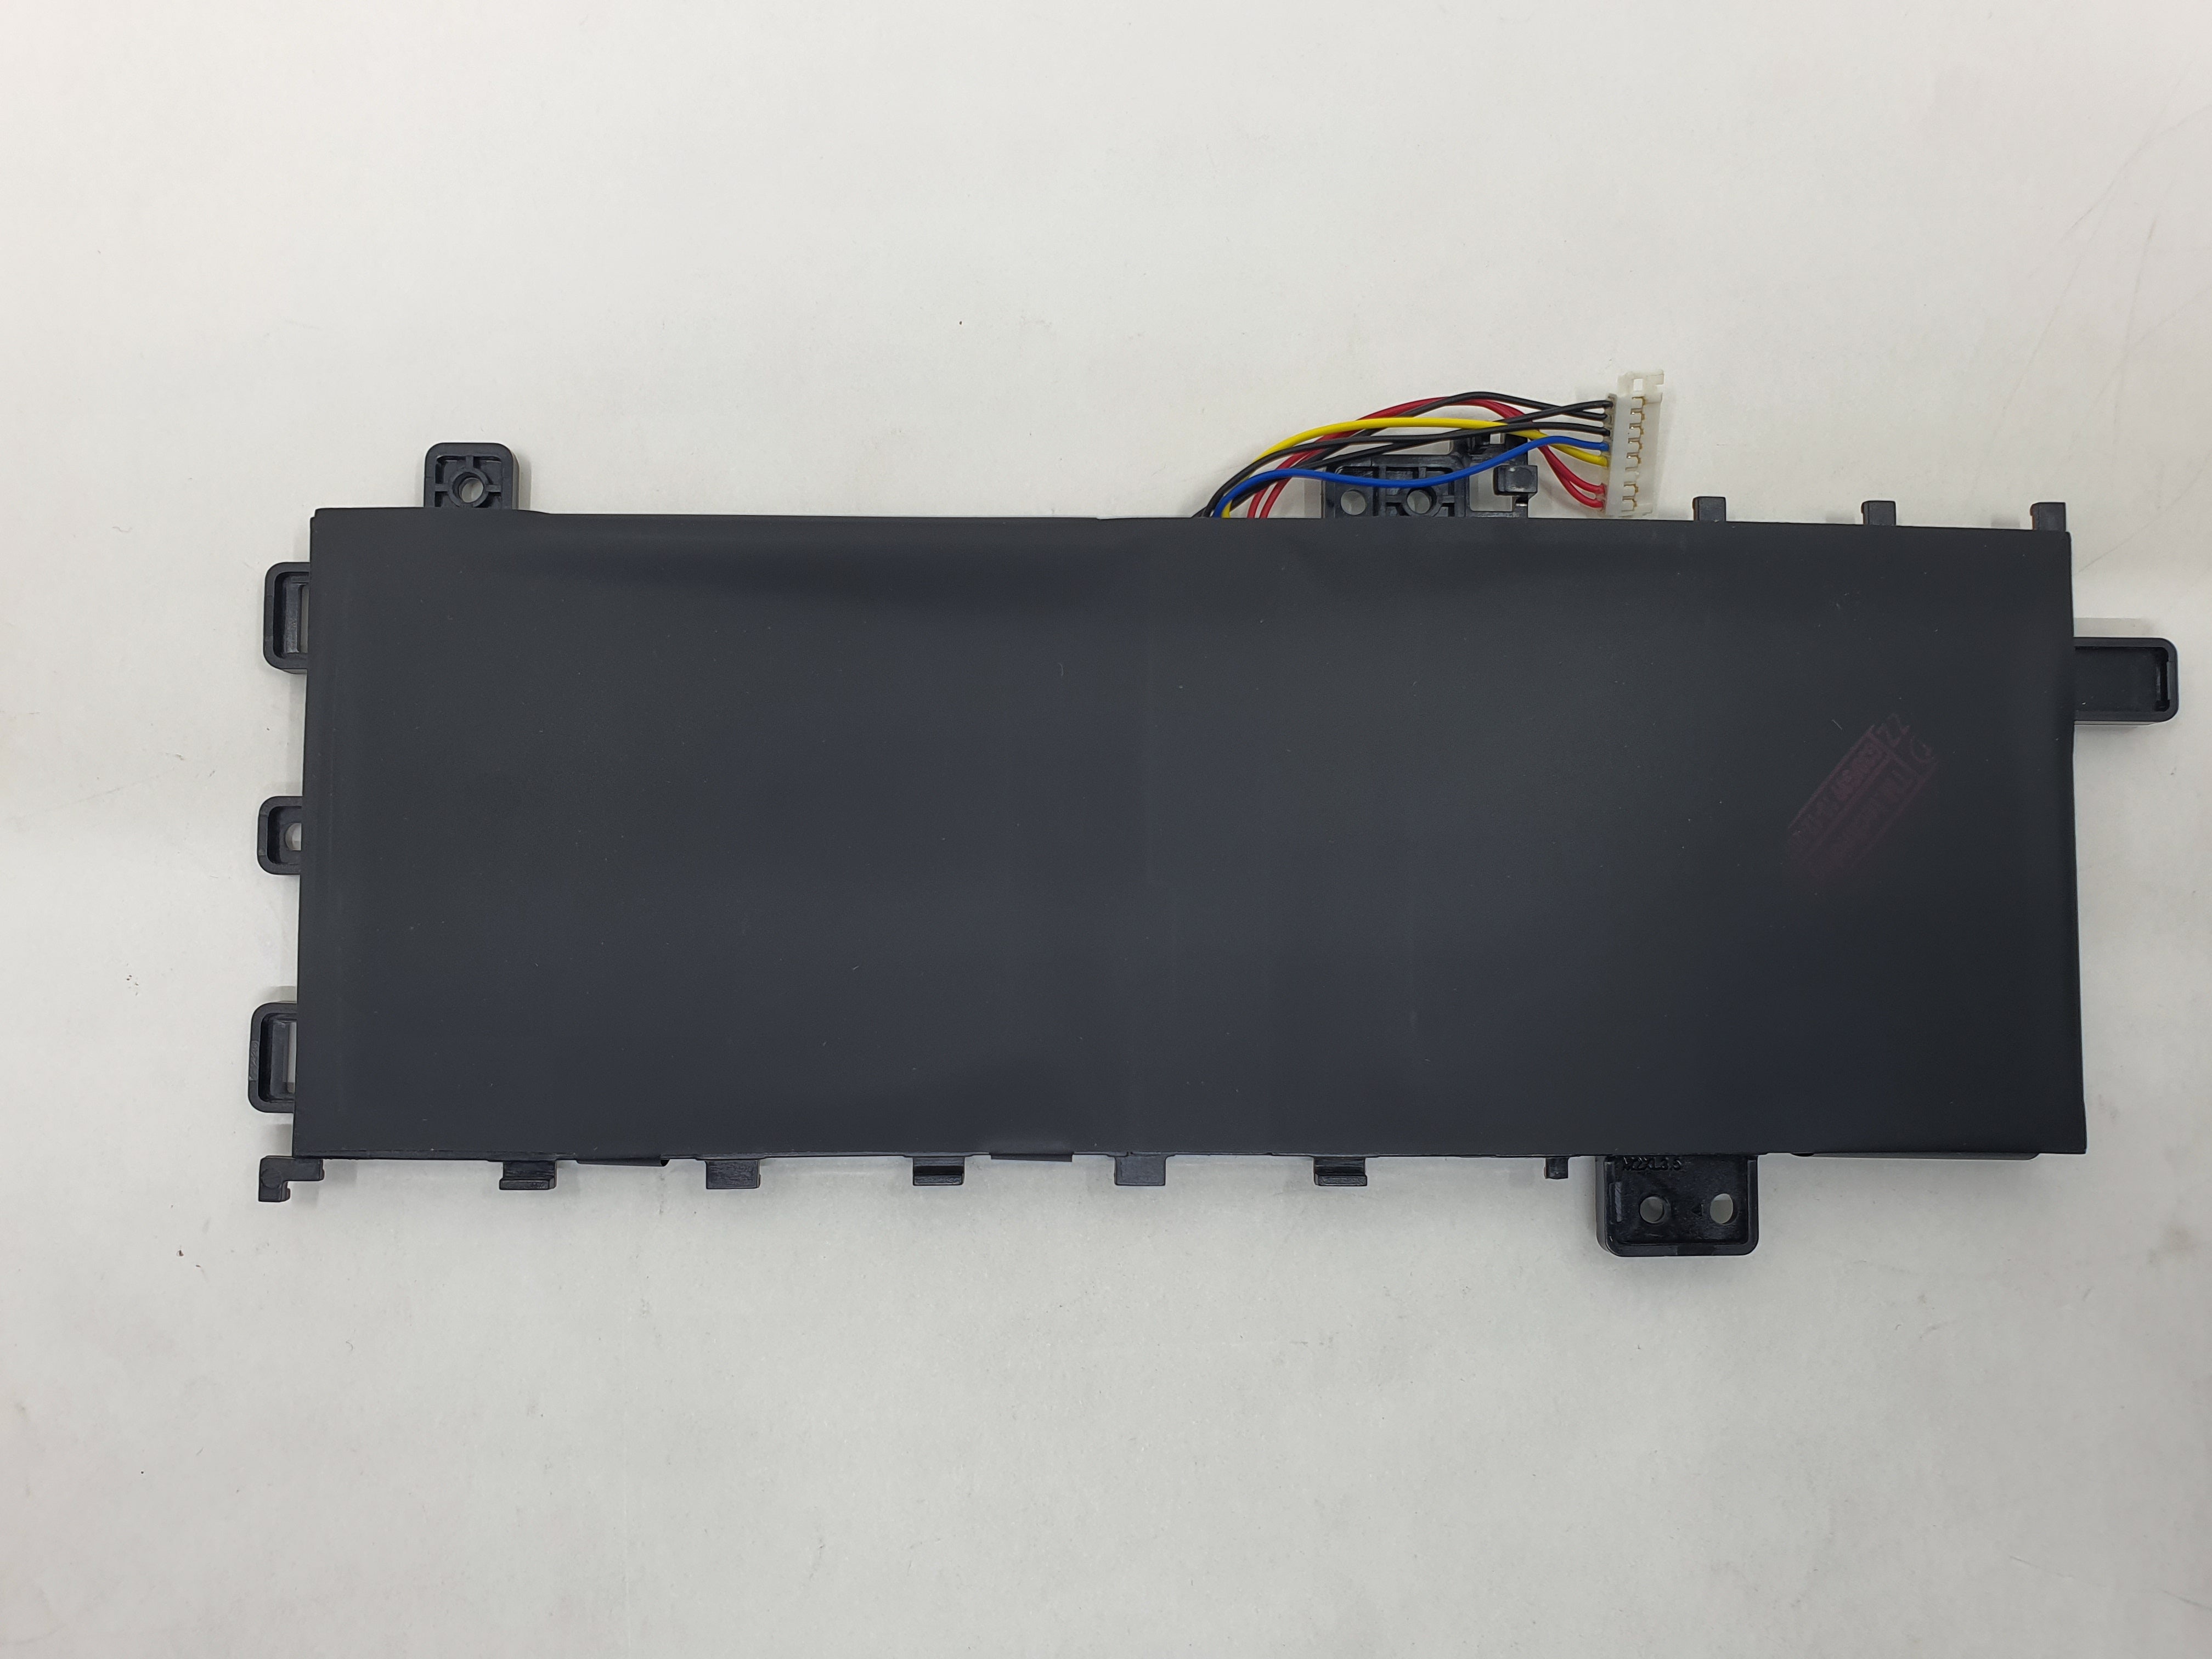 Asus Battery X509JA A1 for Replacement - Asus X509JA